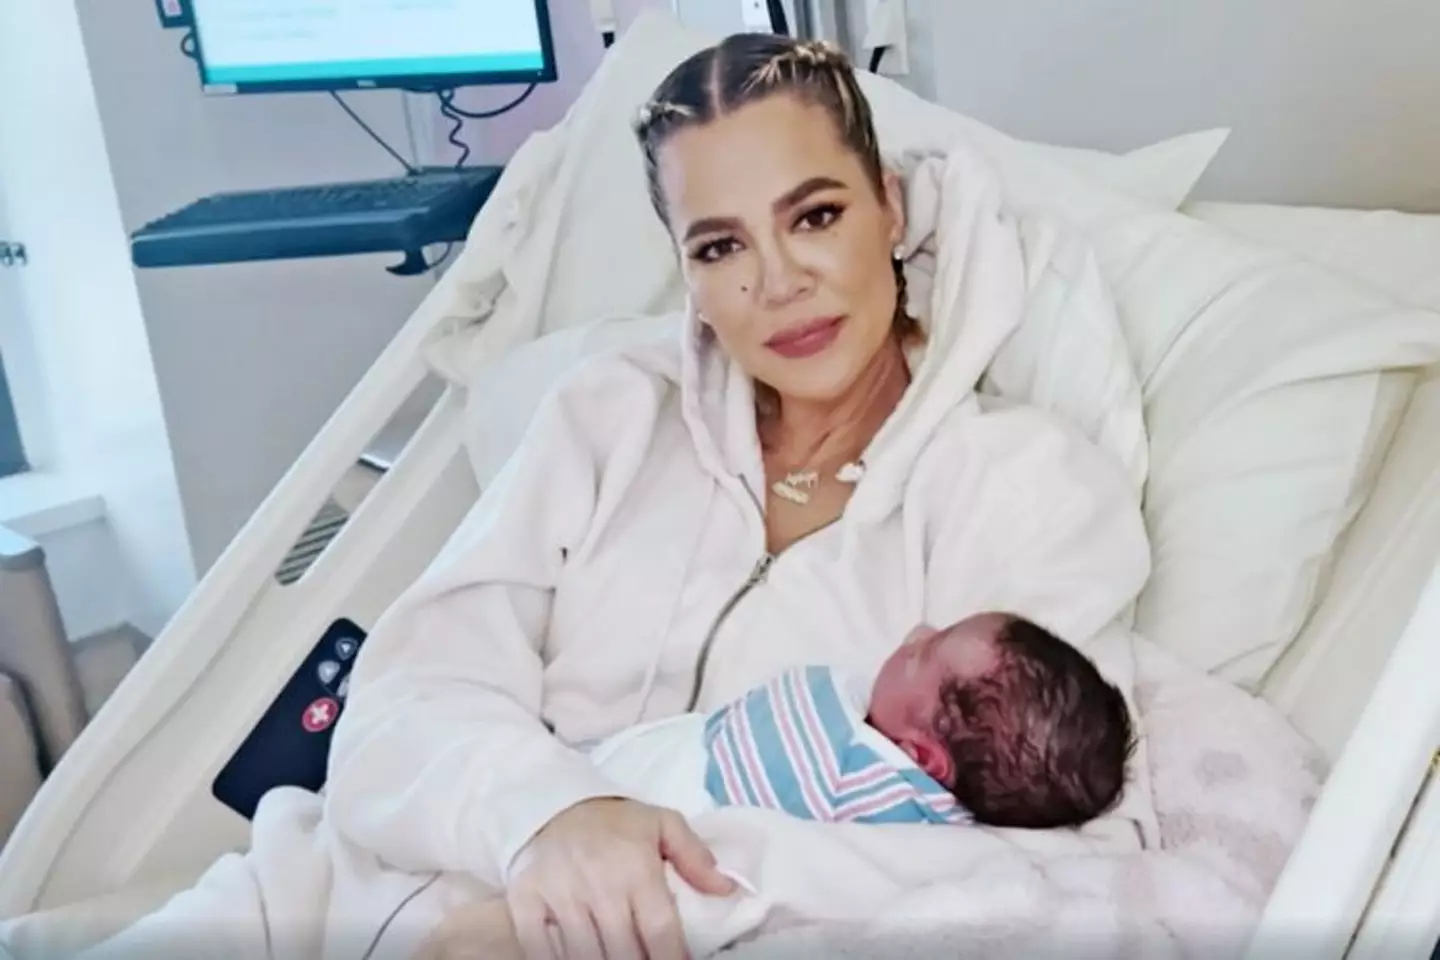 Khloe Kardashian confirms her son's baby name after keeping it a secret for more than a year.